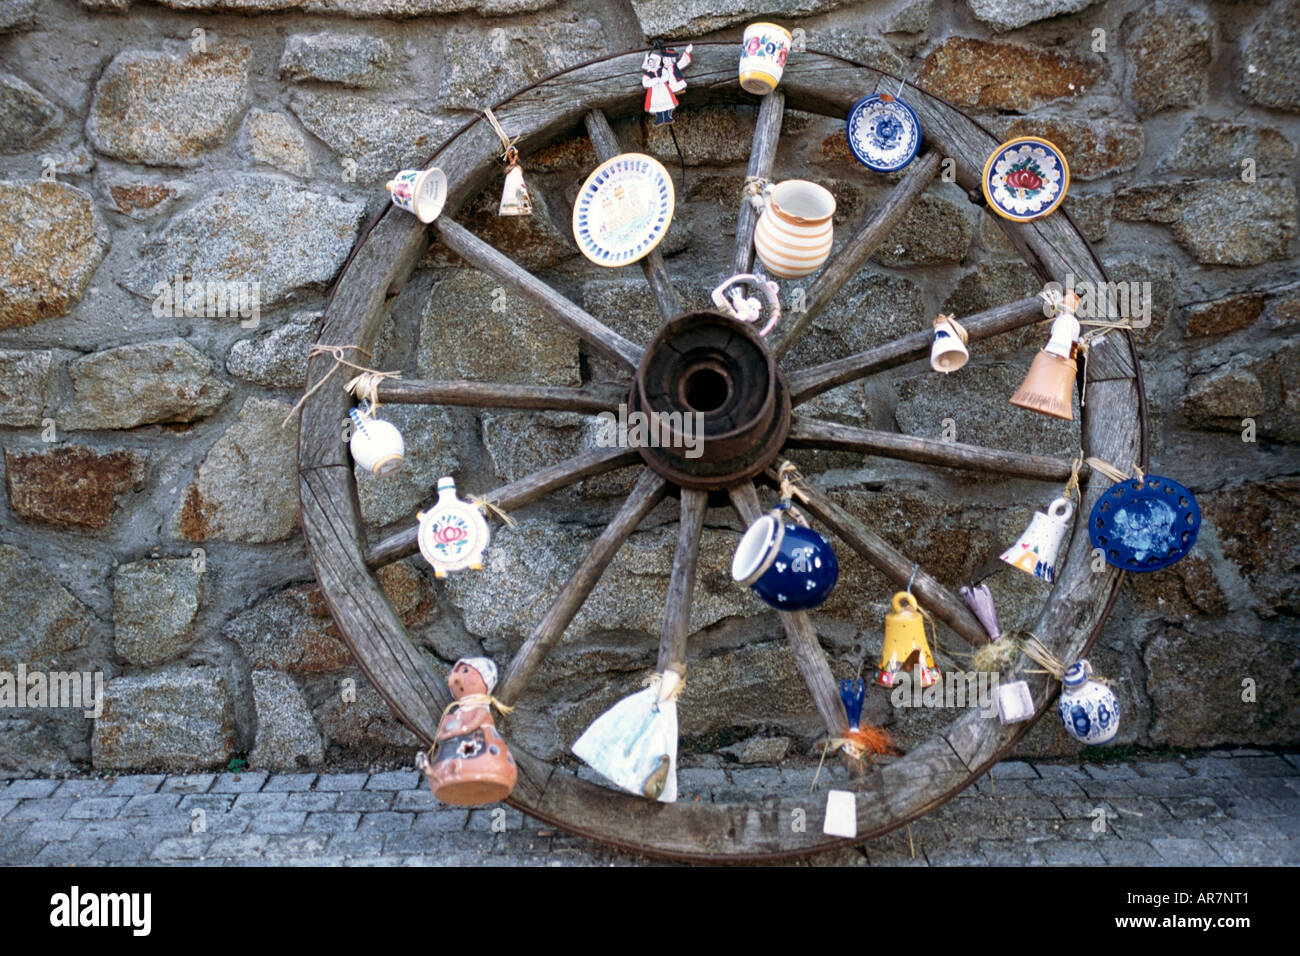 Assorted pottery ornaments hanging on an old wagon wheel in Bratislava, Slovakia. Stock Photo